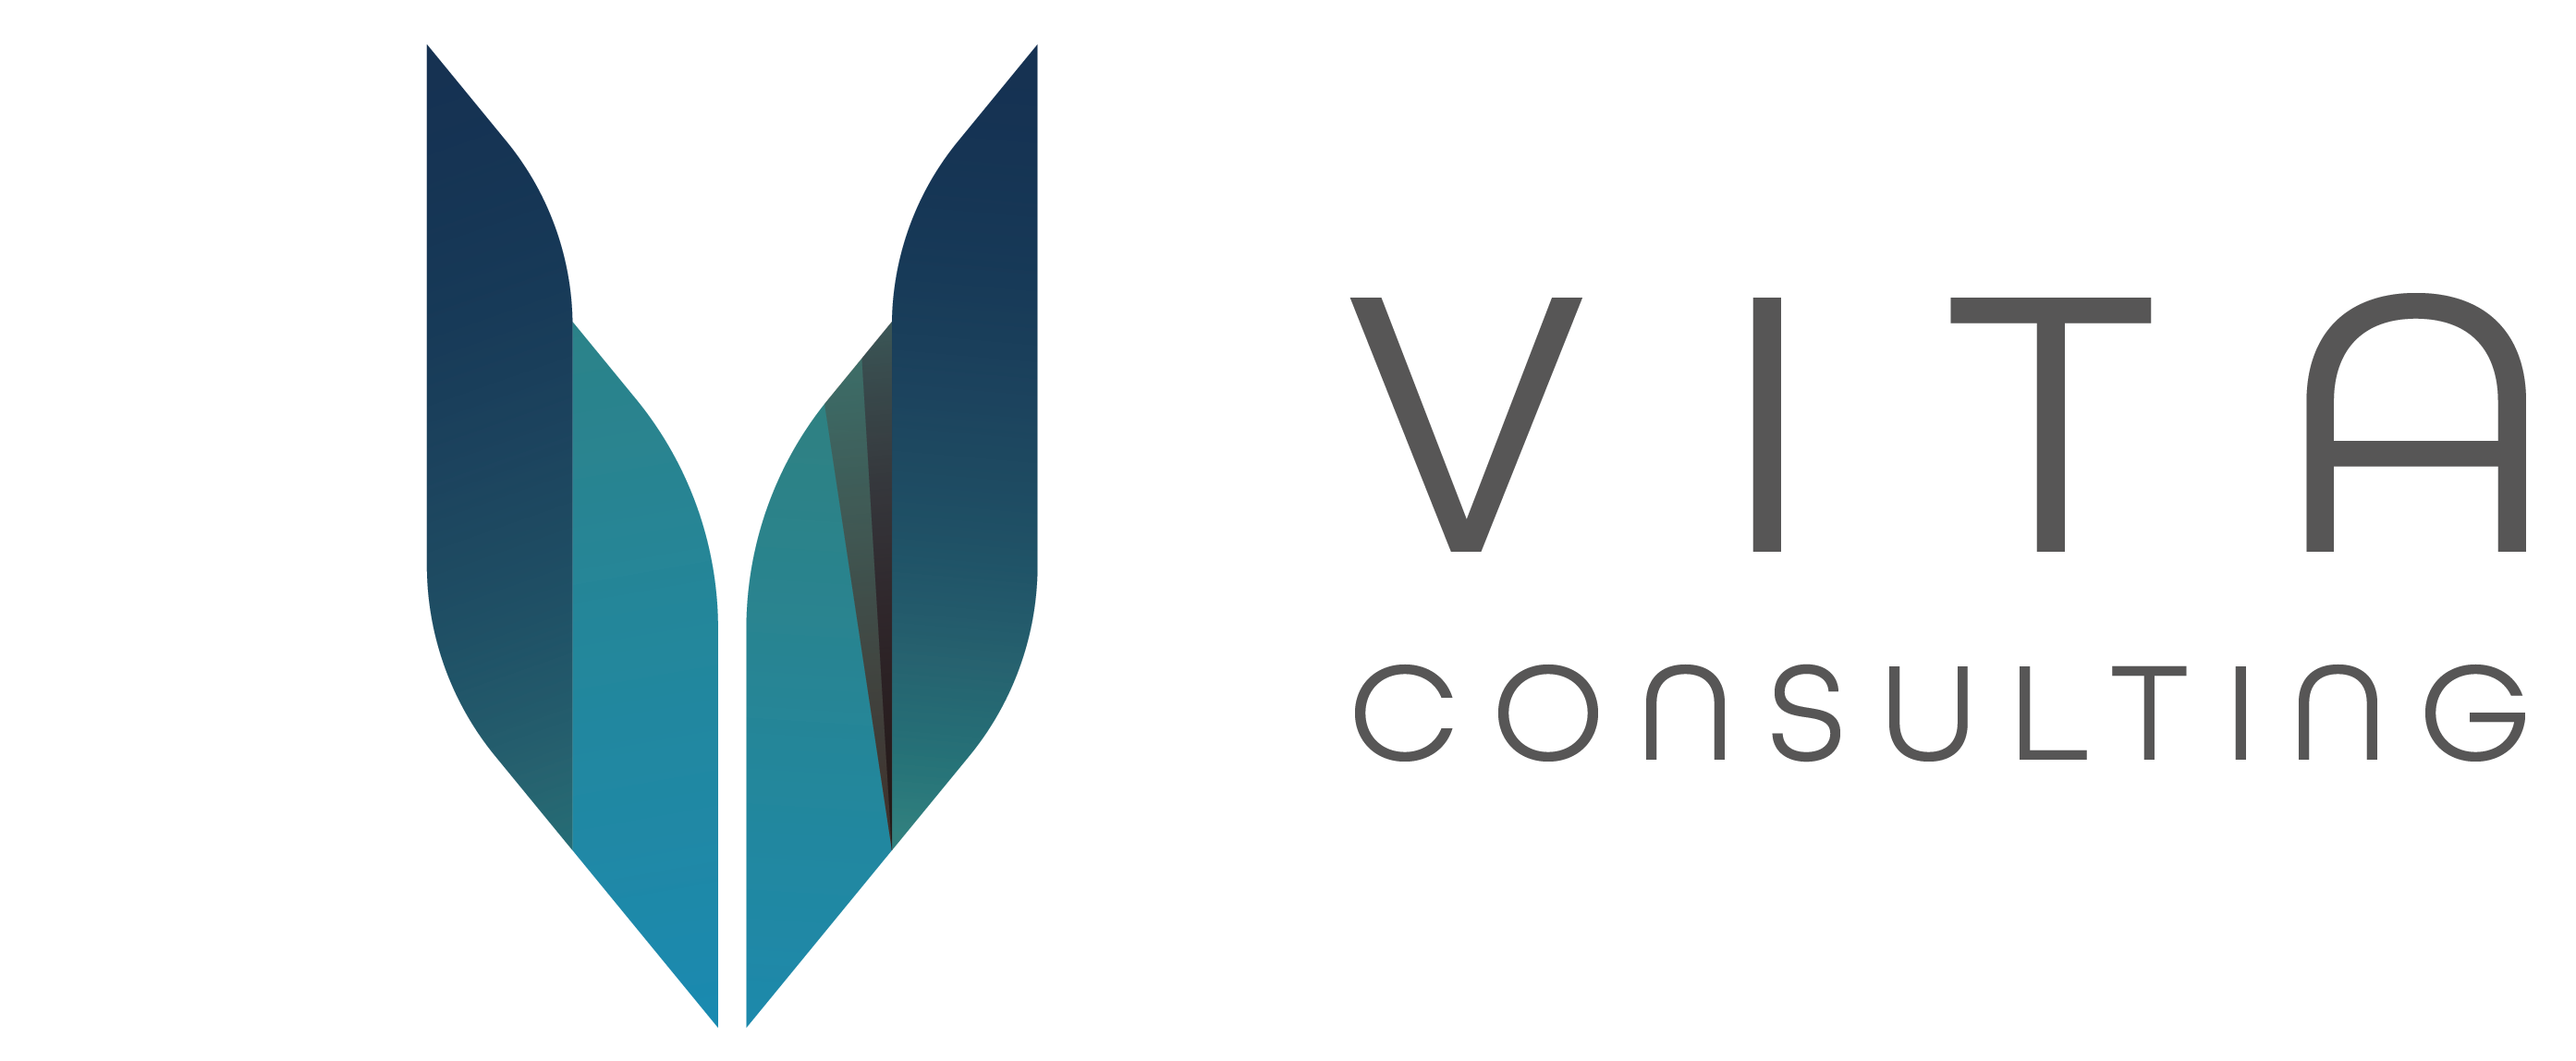 VITA Consulting – Your Trusted Advisor Making Your Business Easier